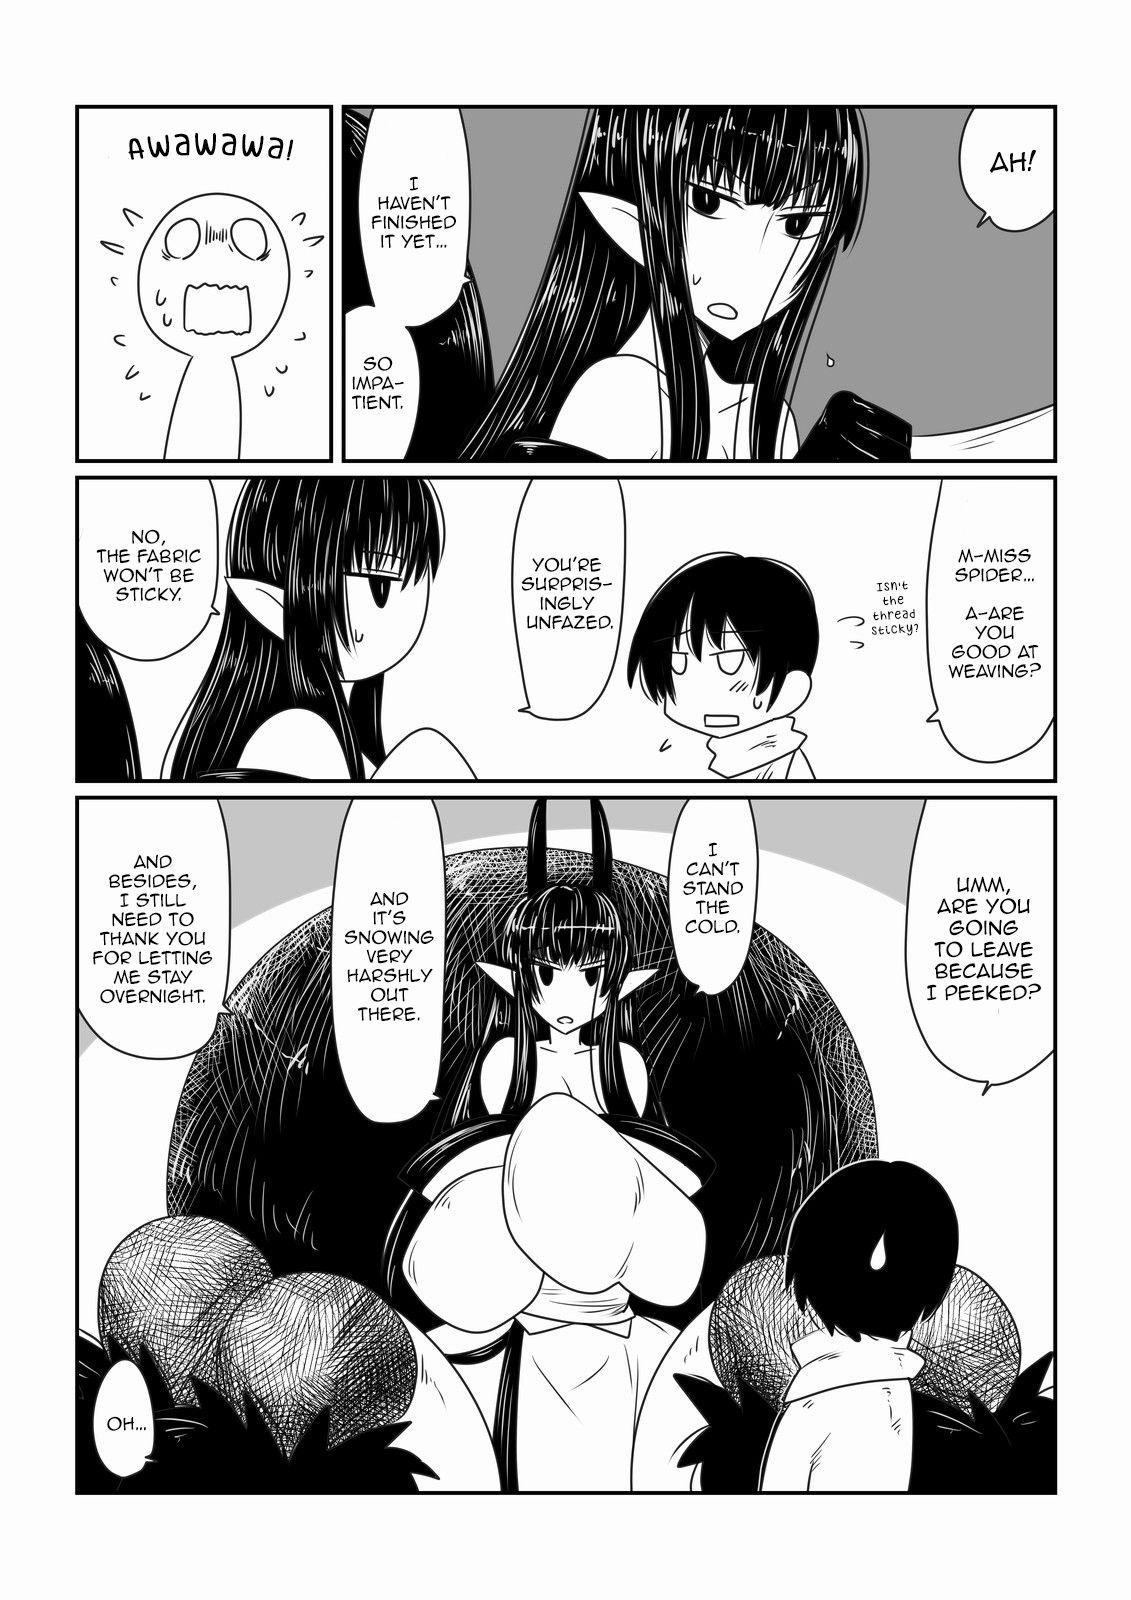 Hot Blow Jobs Kumo Onna-san no Ongaeshi. | The Spider Woman's Repayment. - Original Trap - Page 5